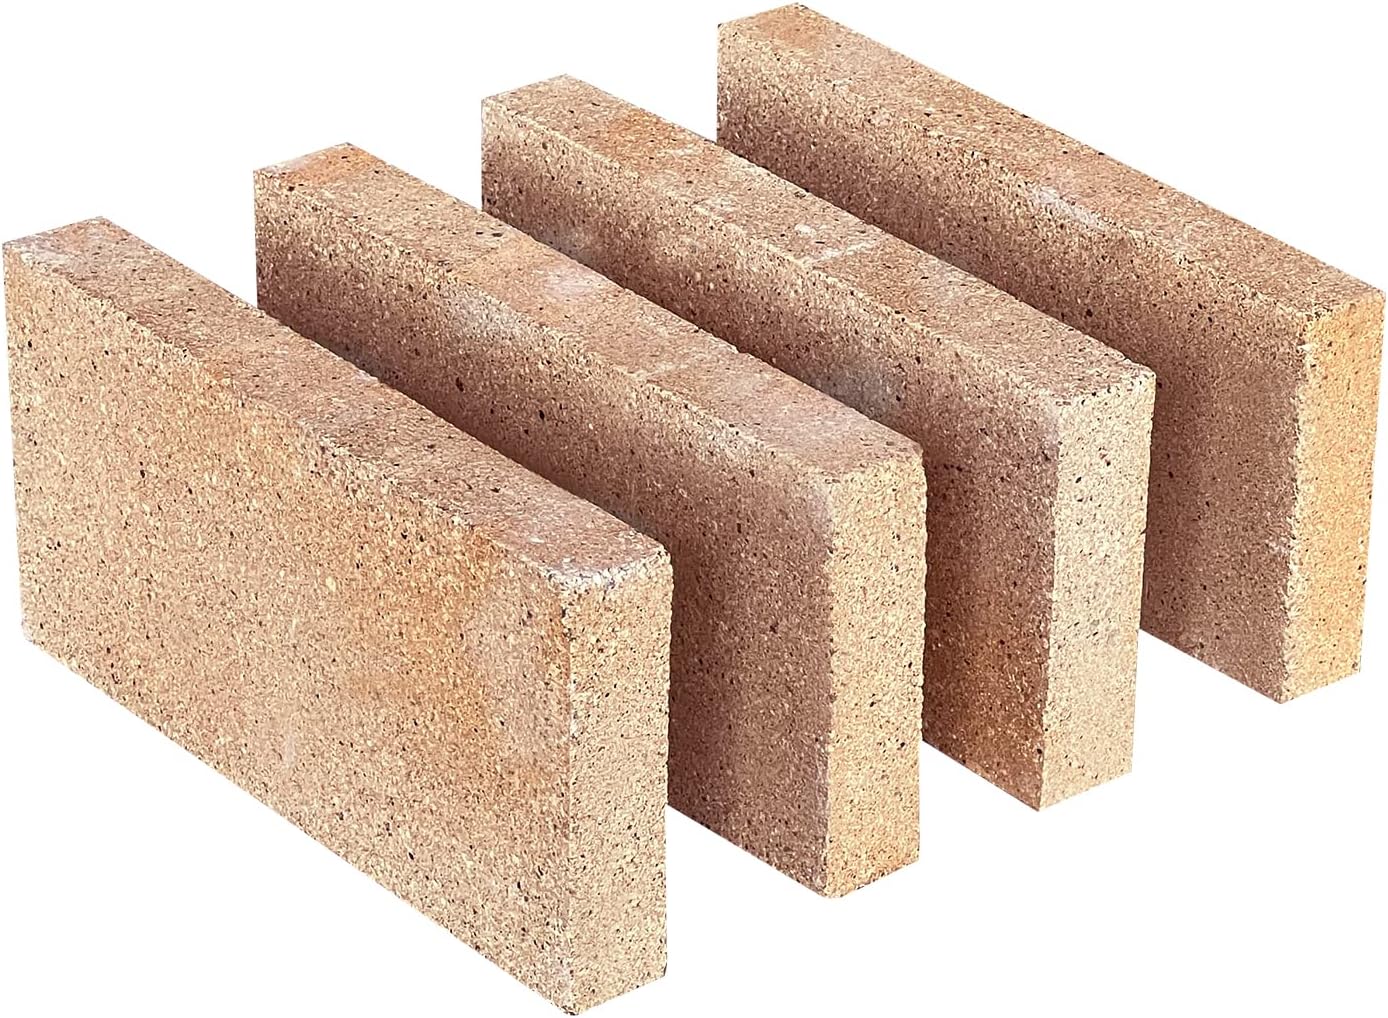  Protalwell Woodstove Firebricks, Upgrade Fire Bricks  Replacement for US Stove FBP6, Size 9 x 4-1/2 x 1-1/4, 6-Pack : Home &  Kitchen